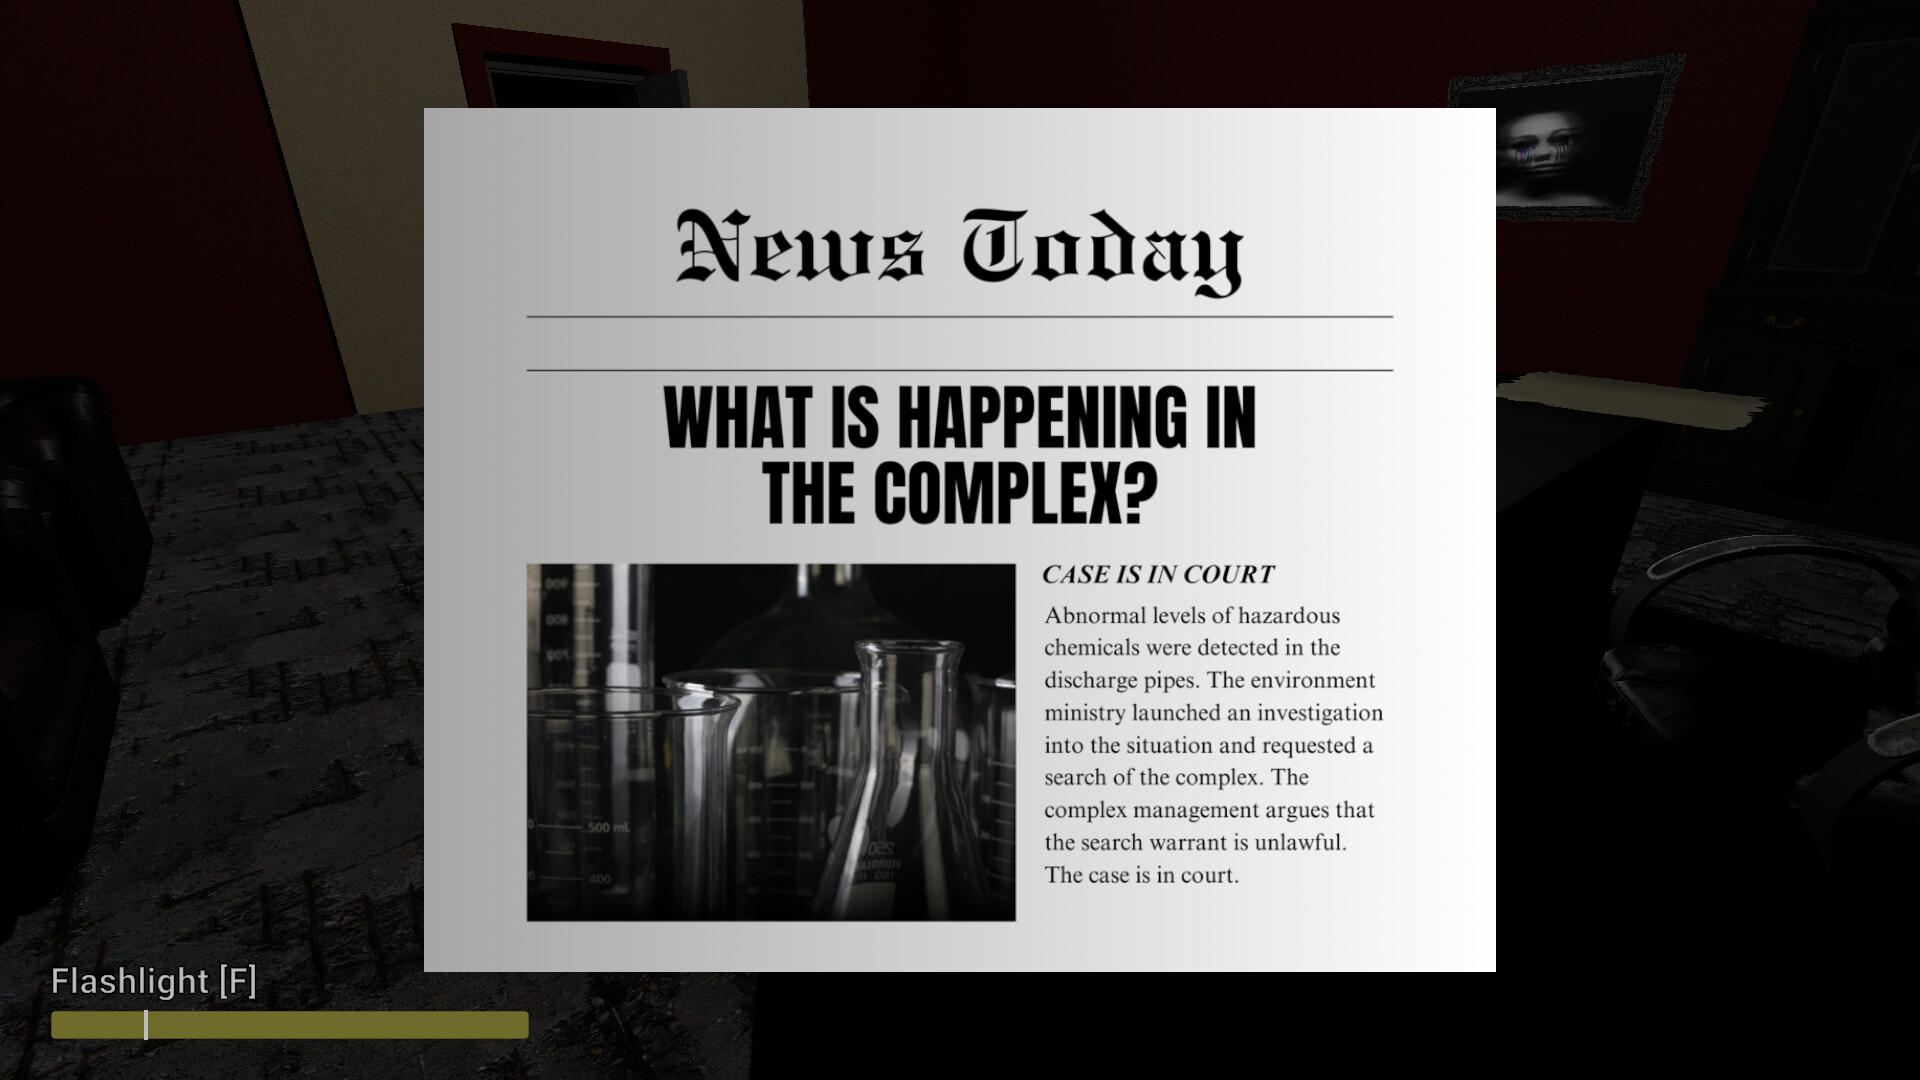 The Complex Tragedy screenshot game